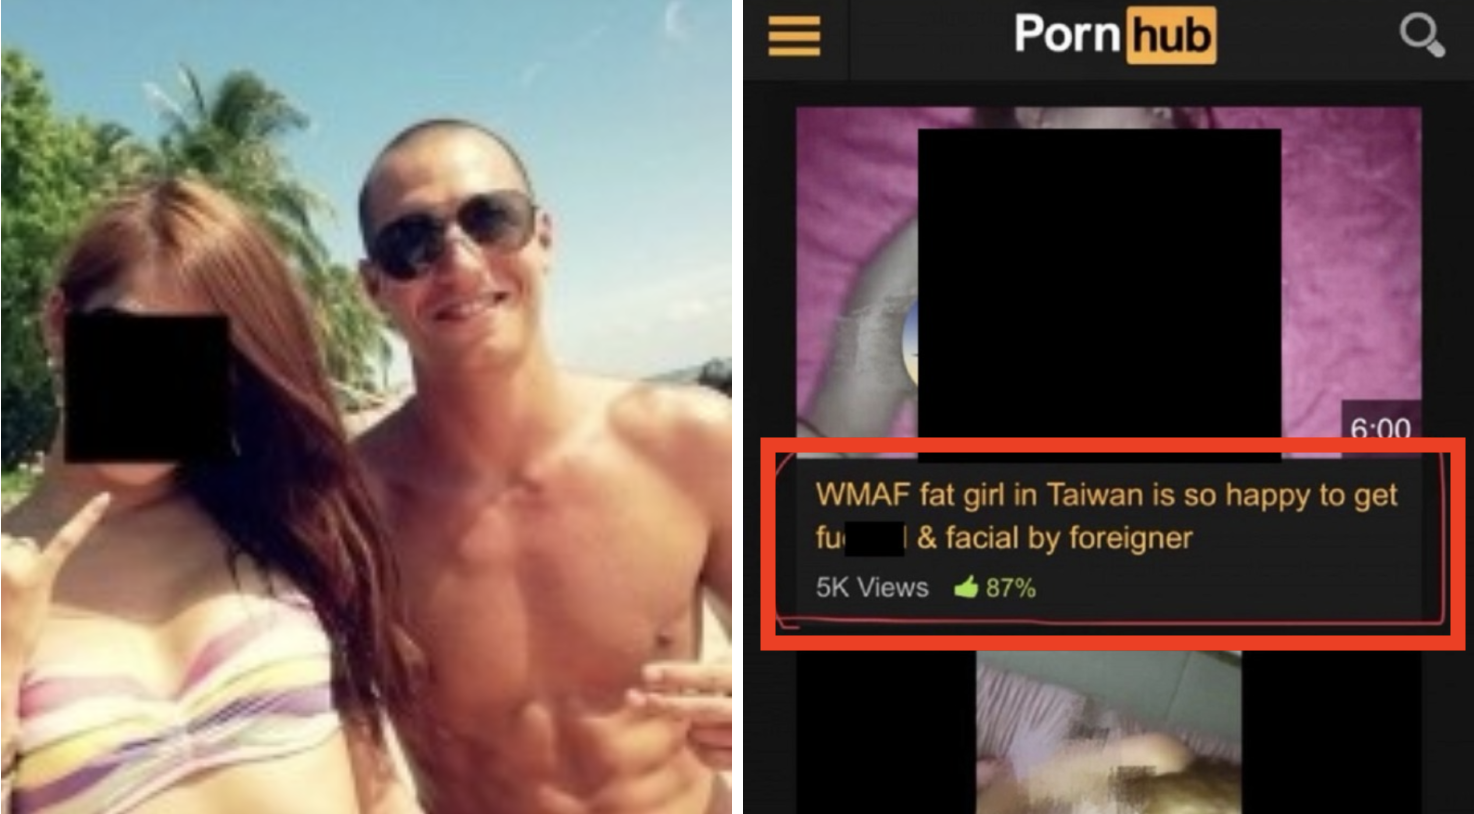 MMA Fighter Who ‘Secretly’ Films Sex With Asian Women Now Back on Pornhub Selling Videos